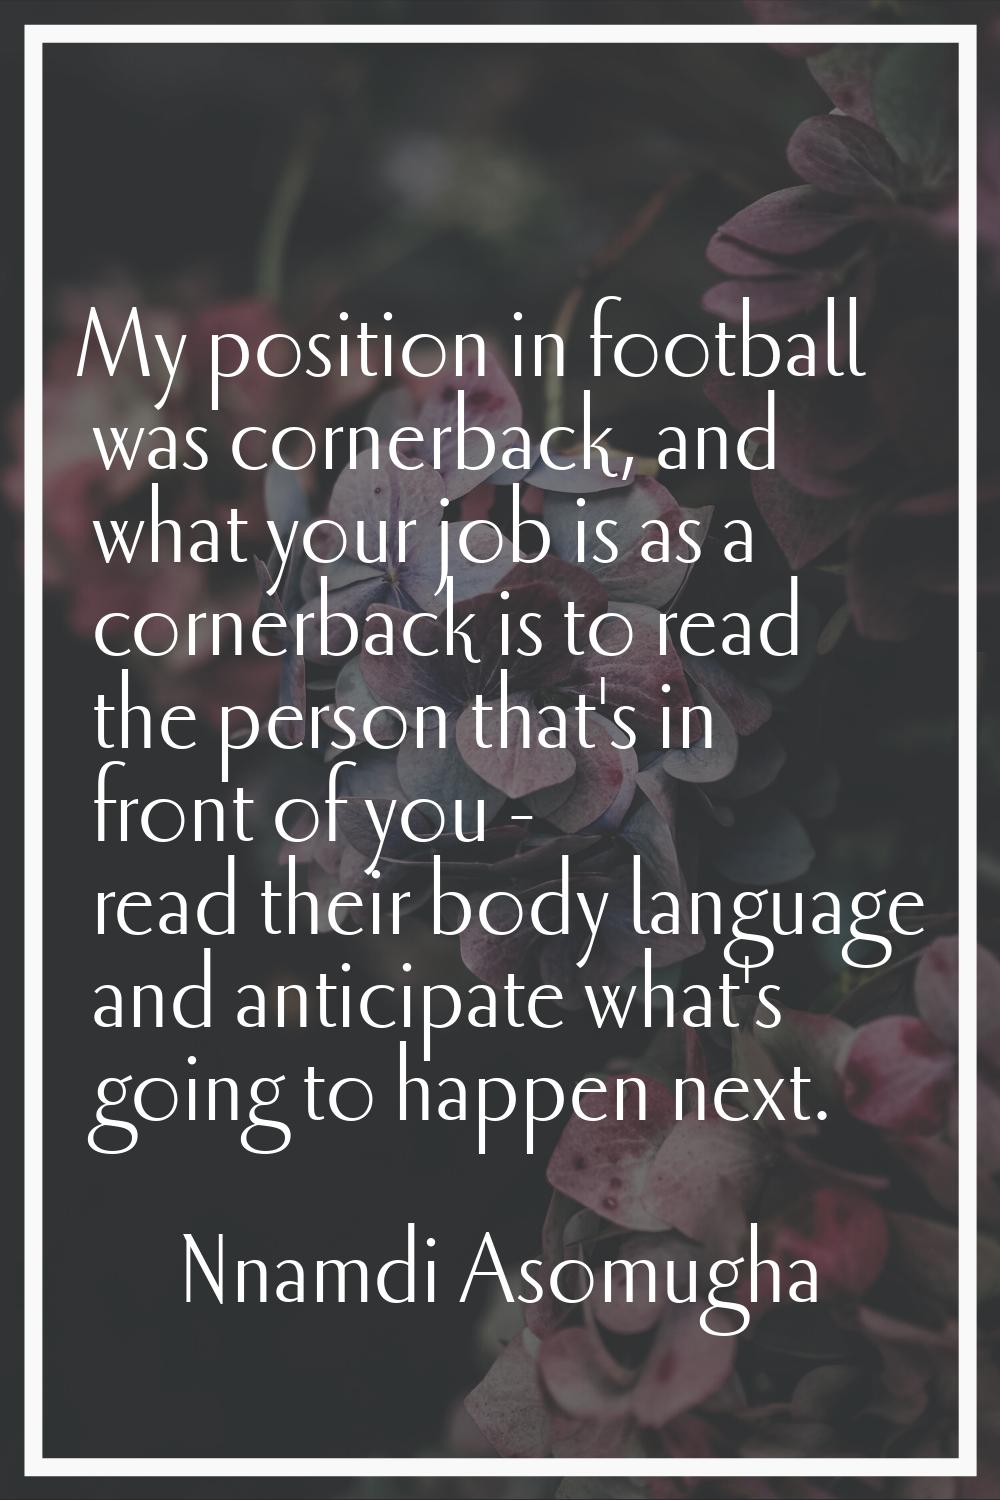 My position in football was cornerback, and what your job is as a cornerback is to read the person 